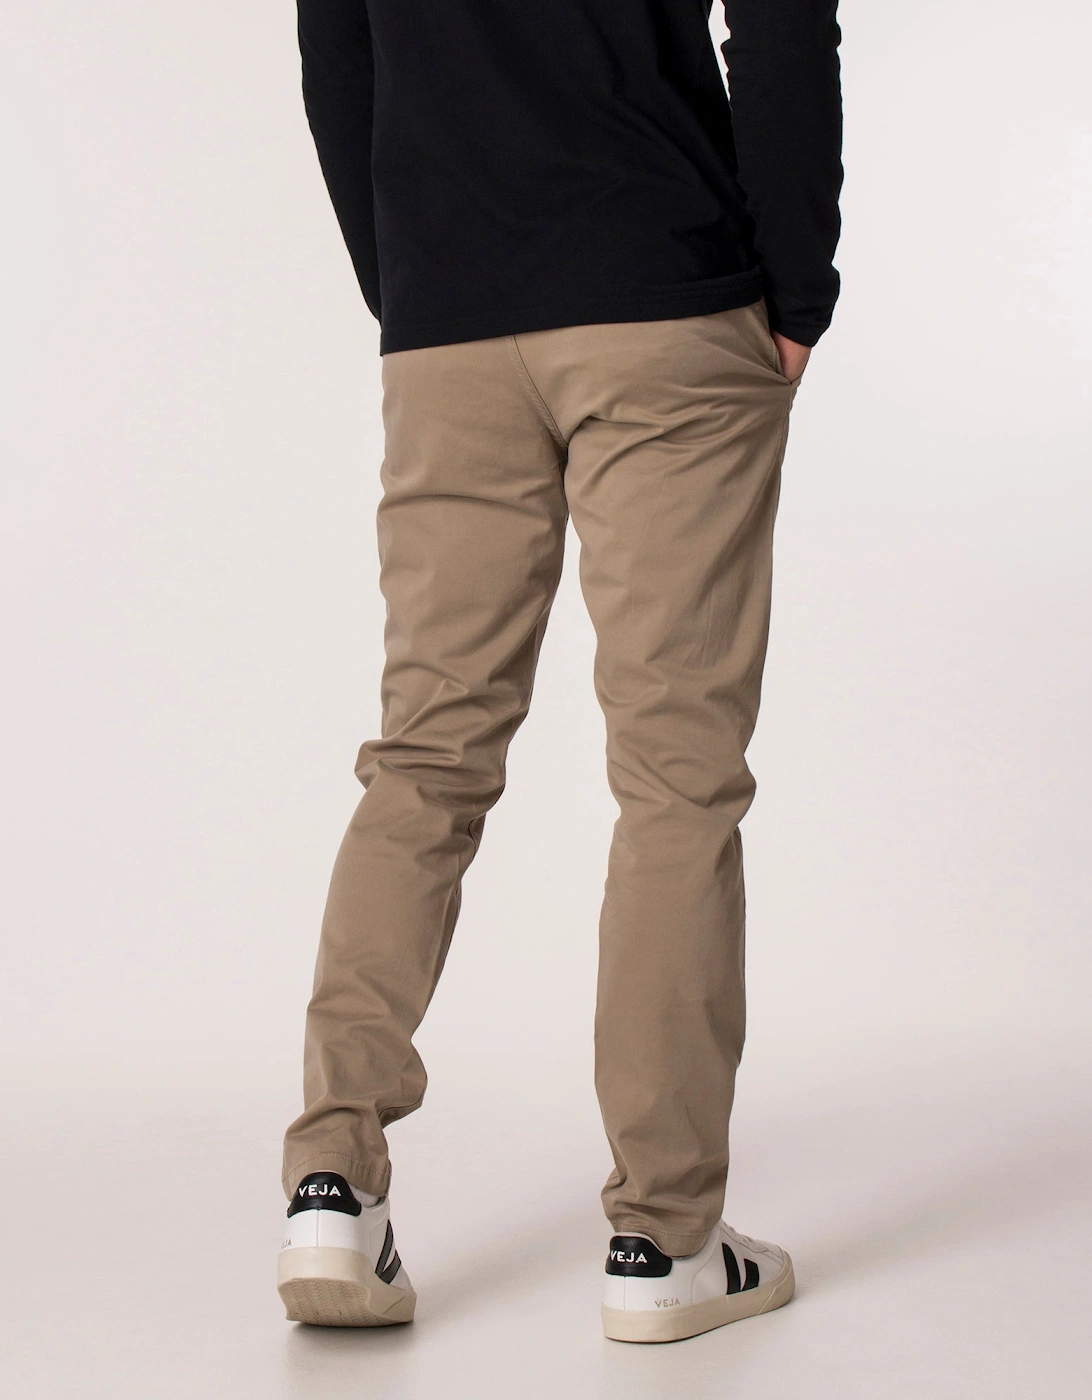 Tapered Fit Schino Taber Chino Pants